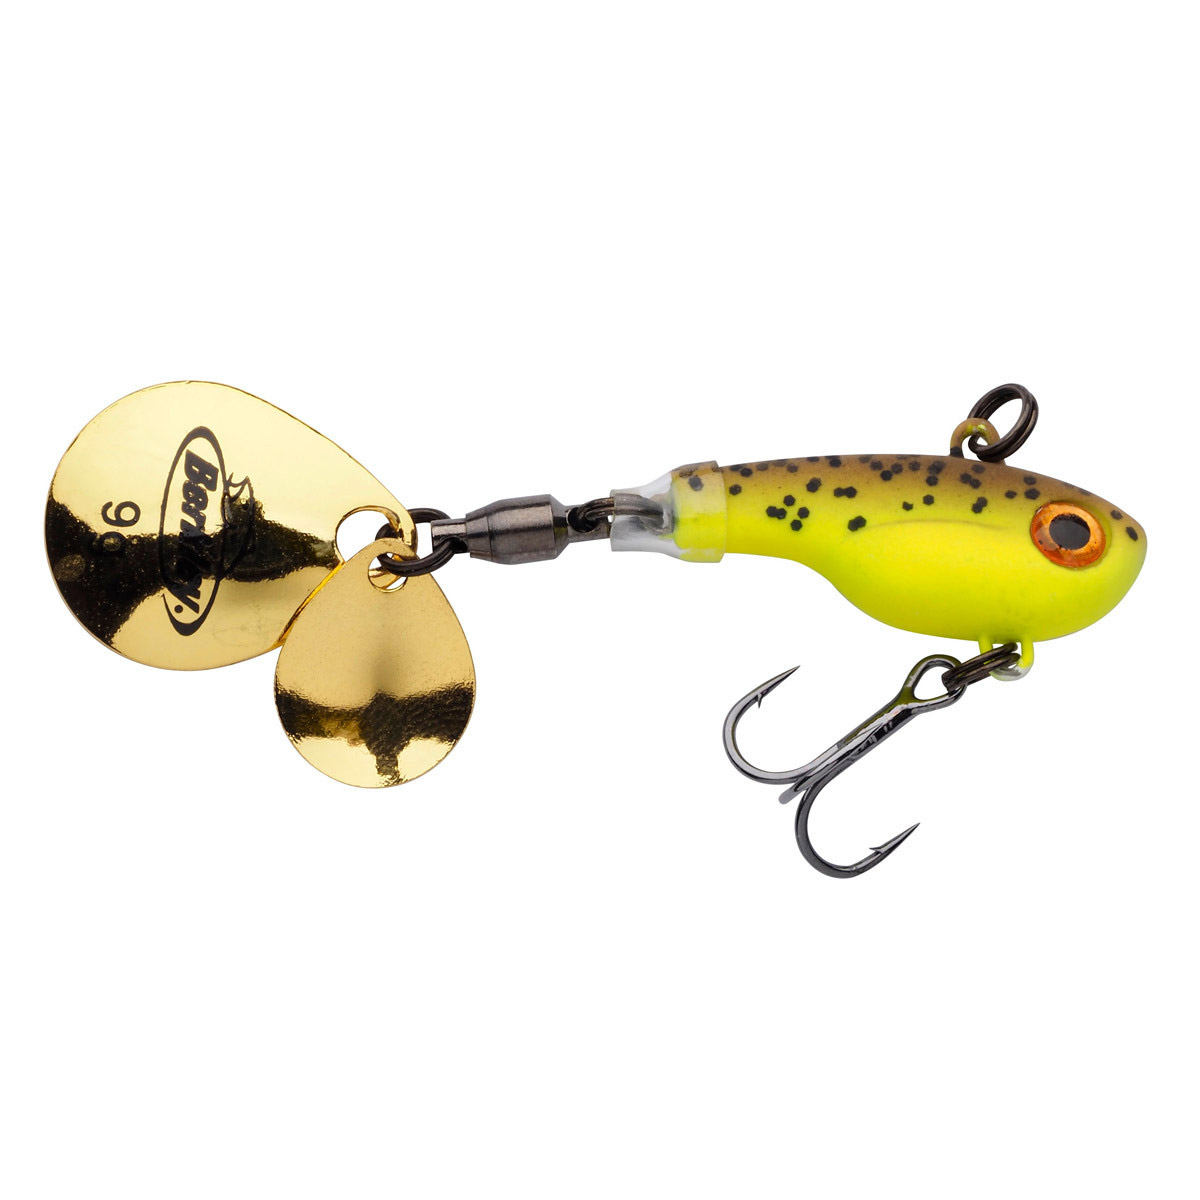 Berkley Pulse Spintail Fishing Lure Overview 